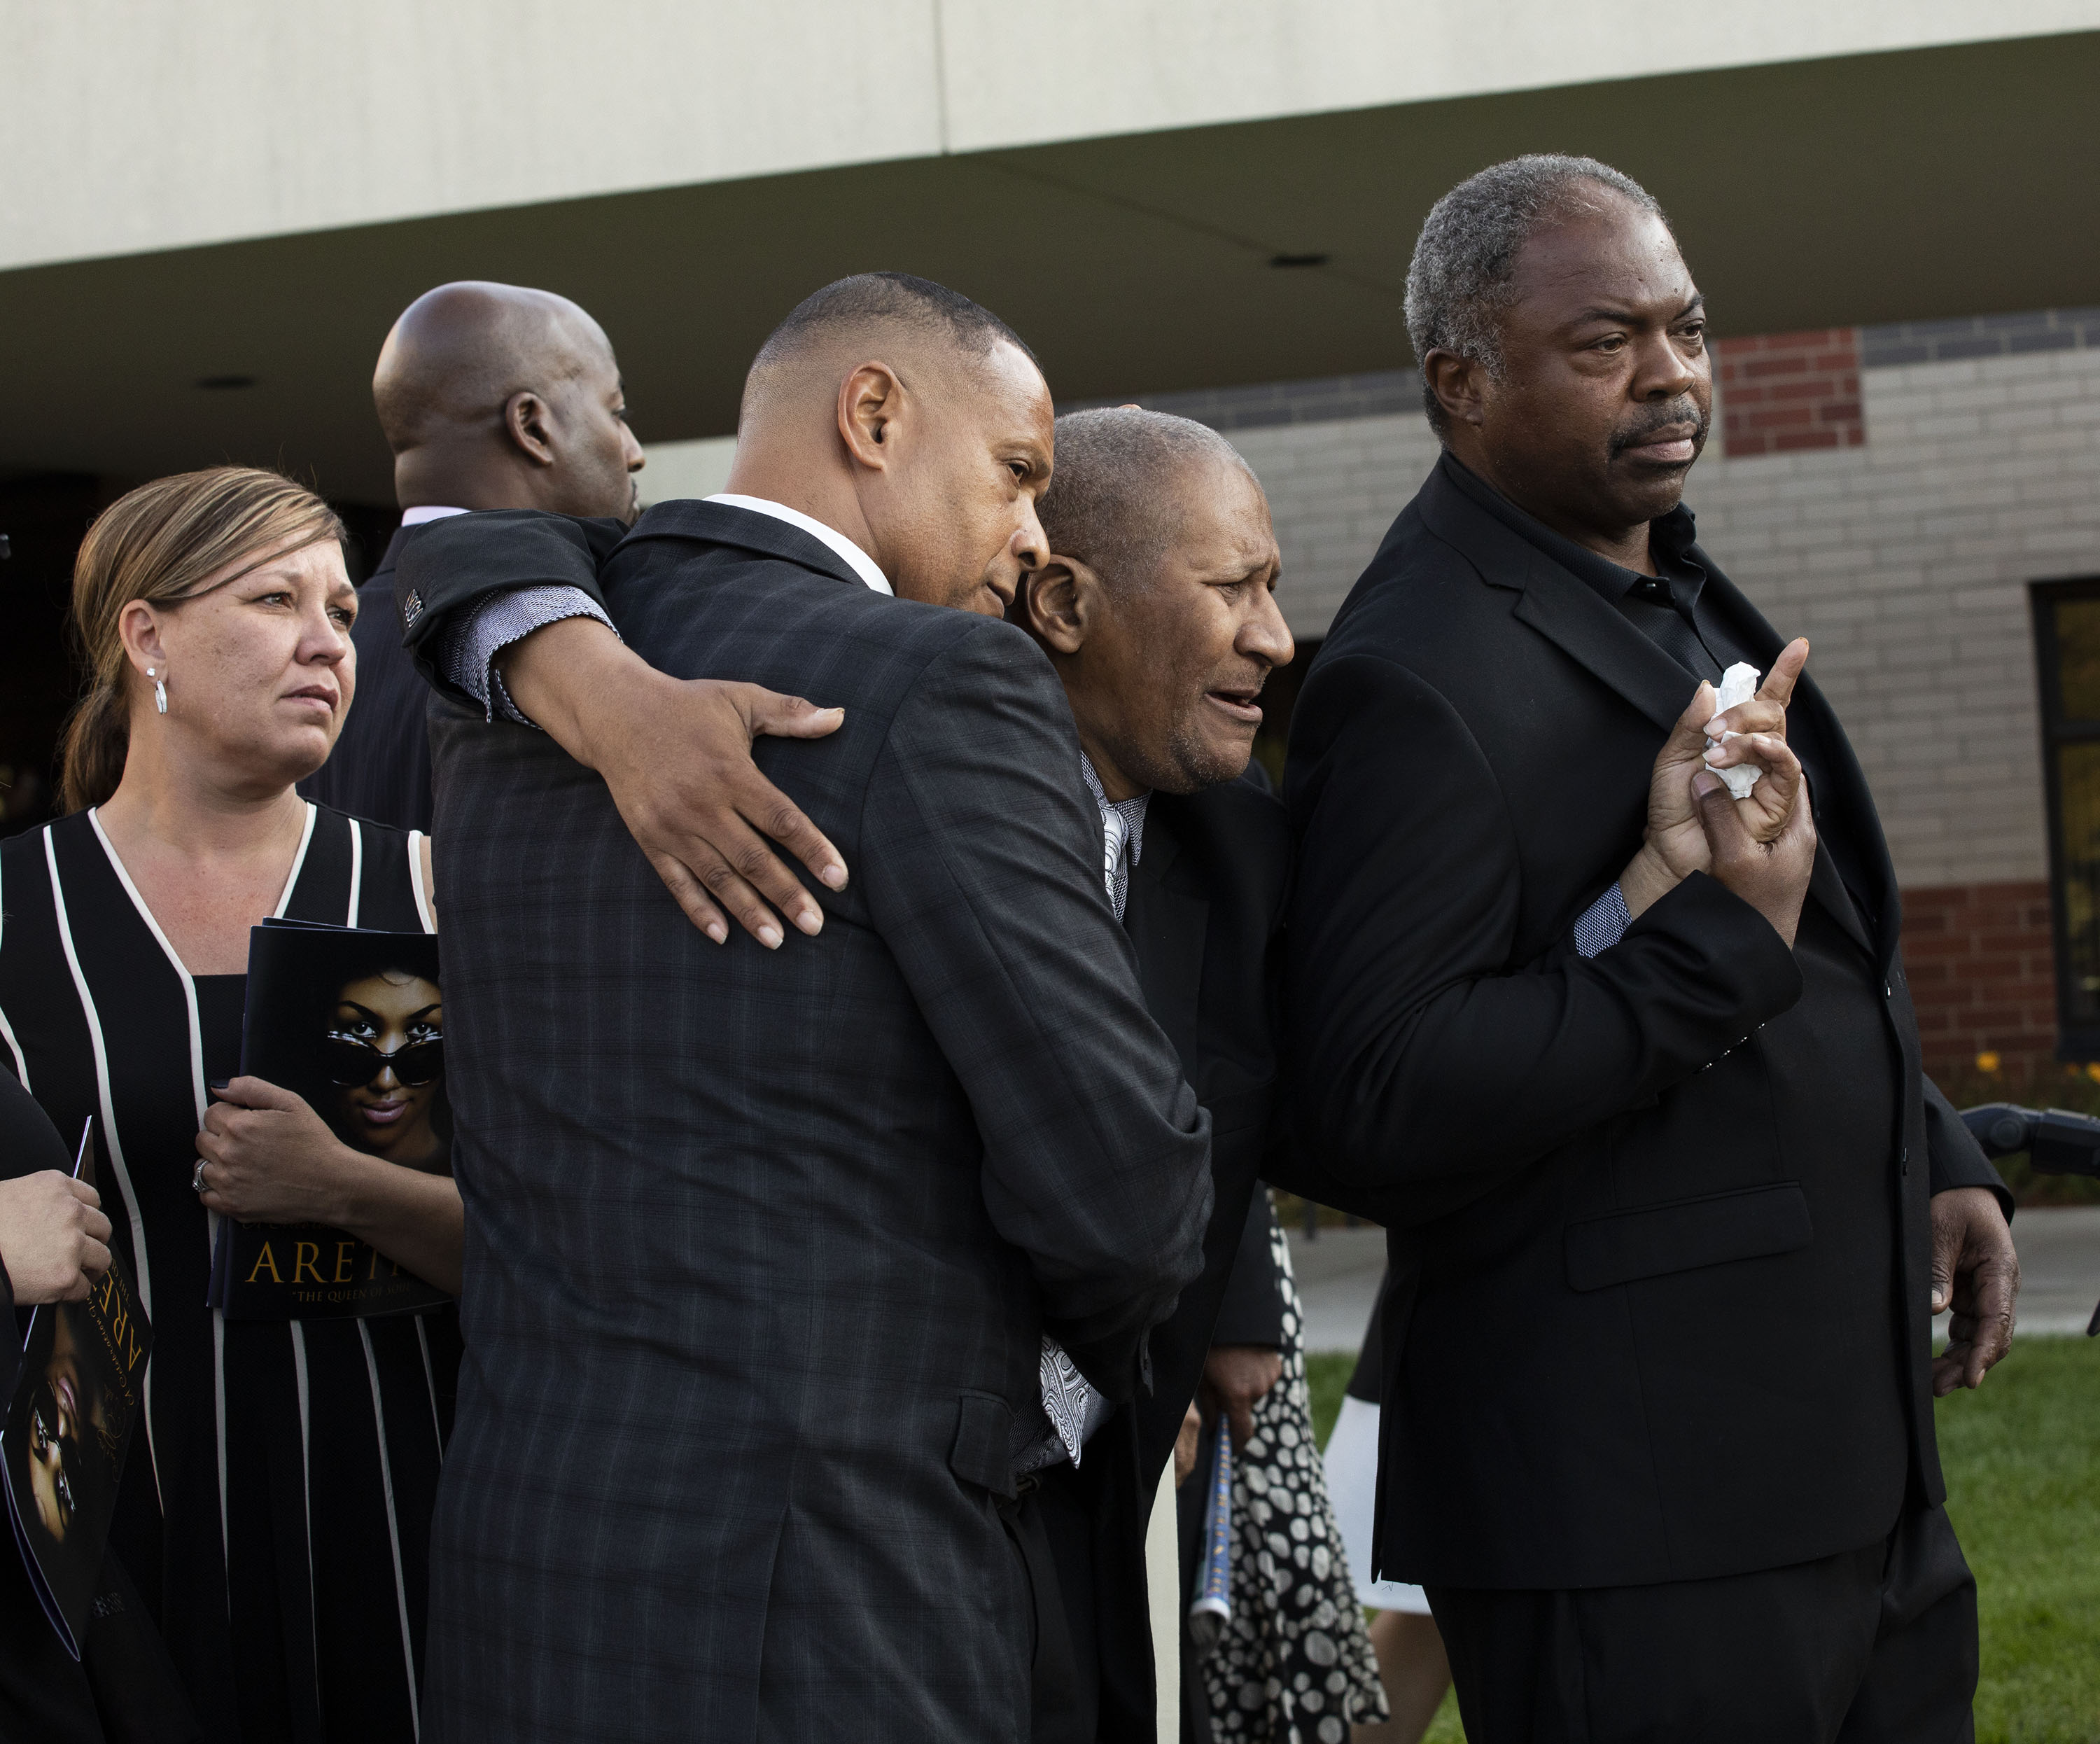 Clarence Franklin, Aretha Franklin's son, is supported by two friends after his mother's funeral on August 31, 2018 in Detroit, Michigan | Source: Getty Images